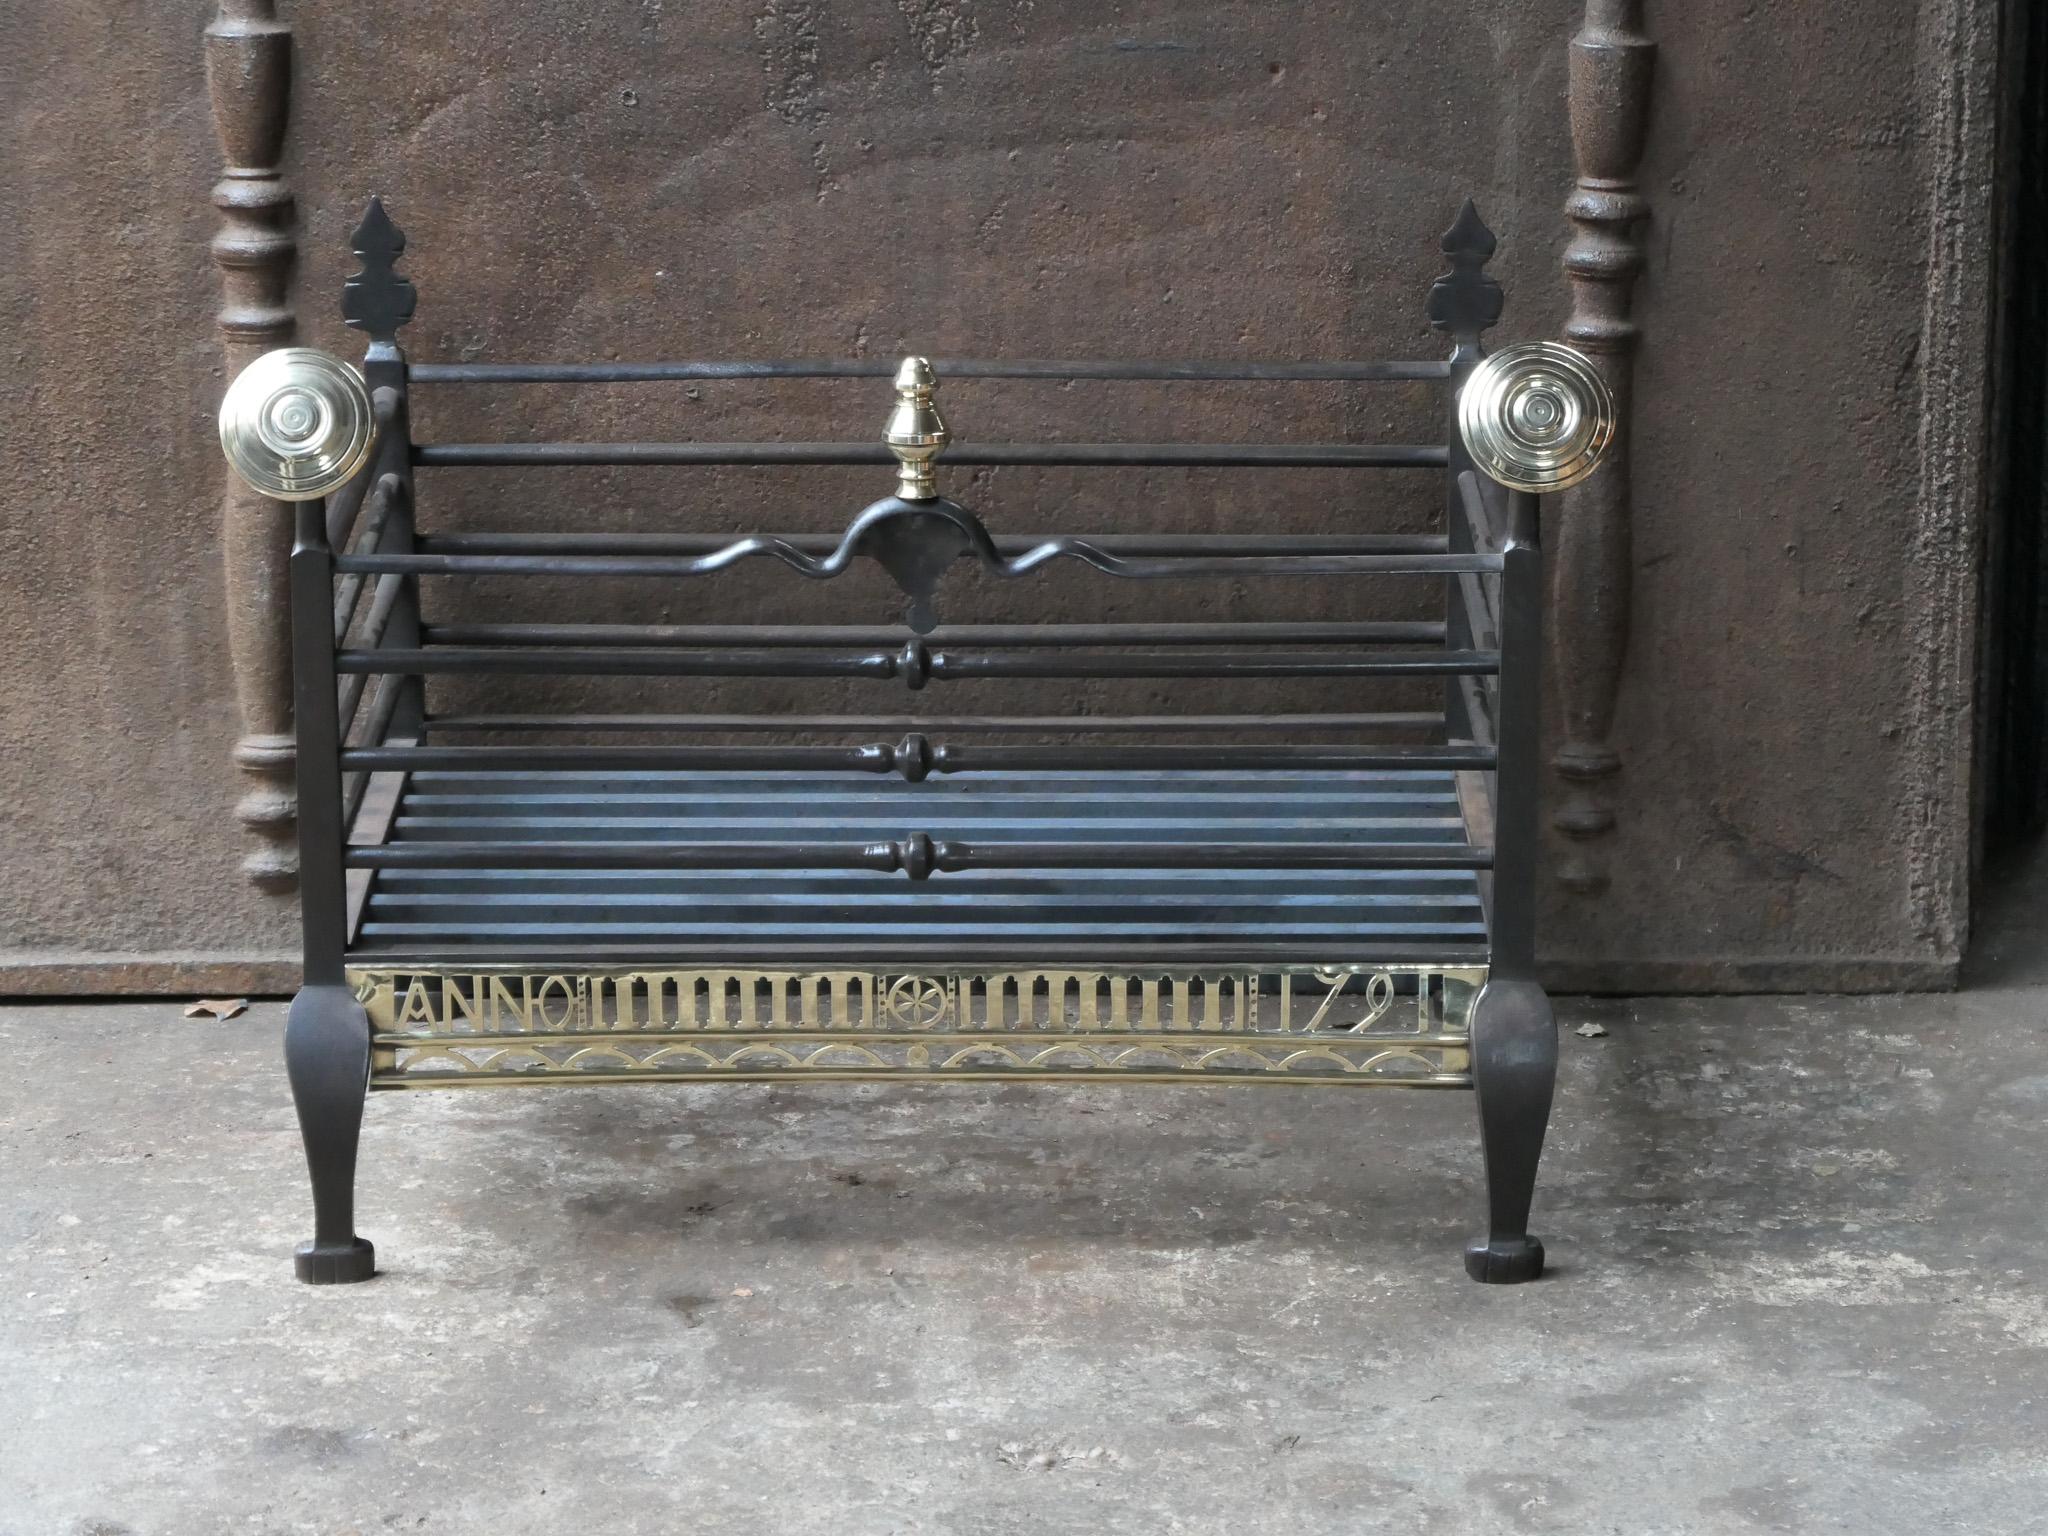 Forged Unique 18th Century Dutch Georgian Fireplace Grate or Fire Grate For Sale